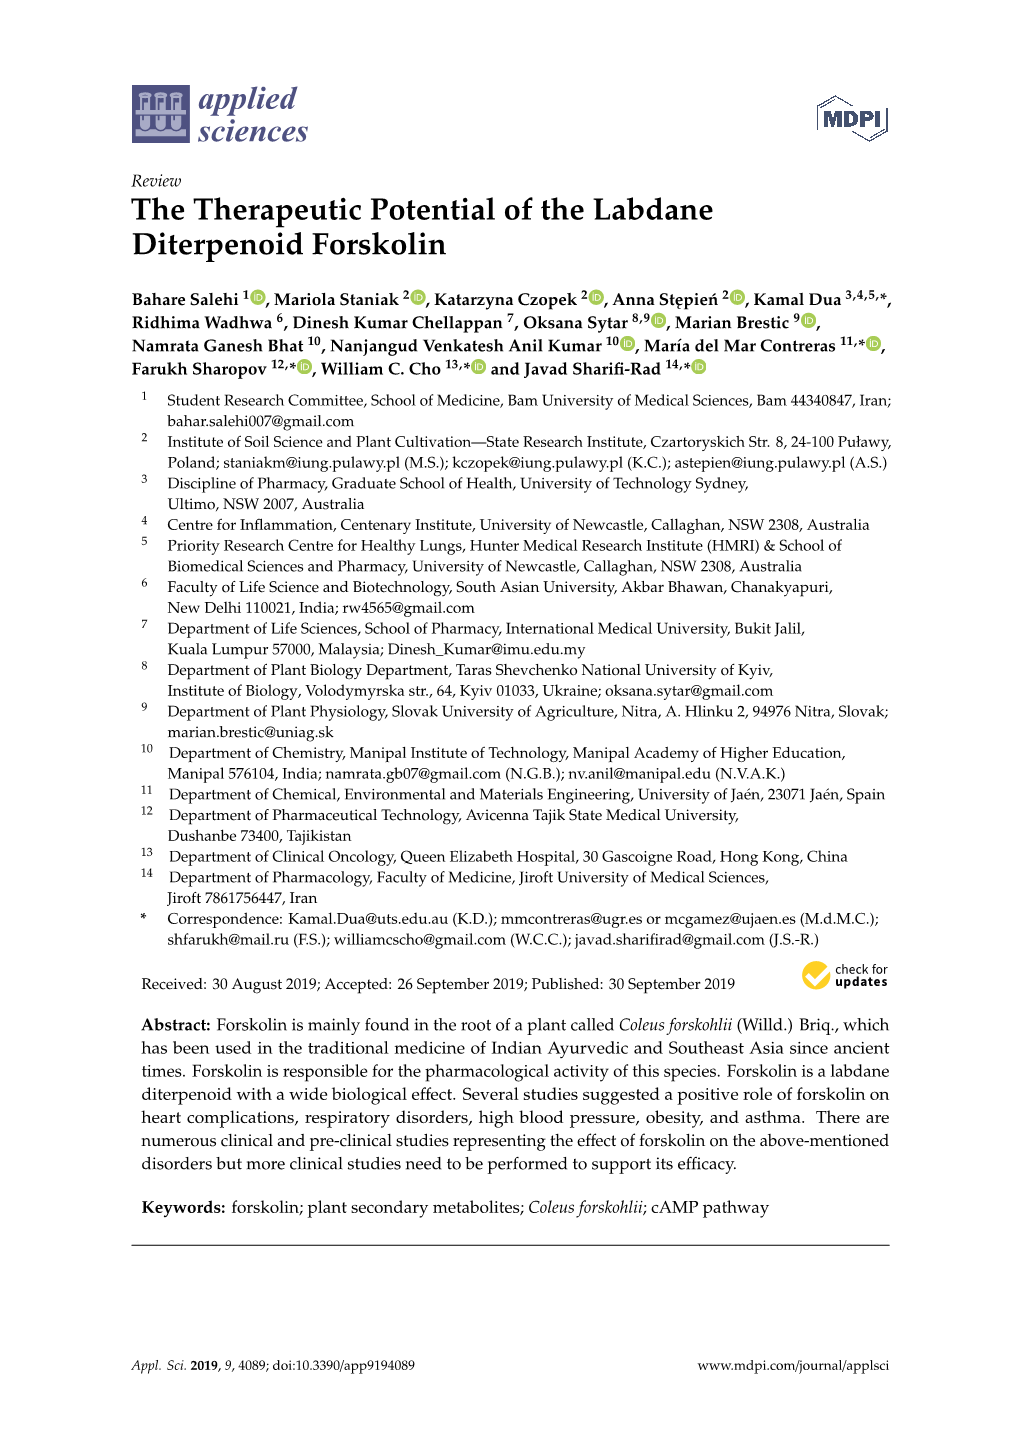 The Therapeutic Potential of the Labdane Diterpenoid Forskolin